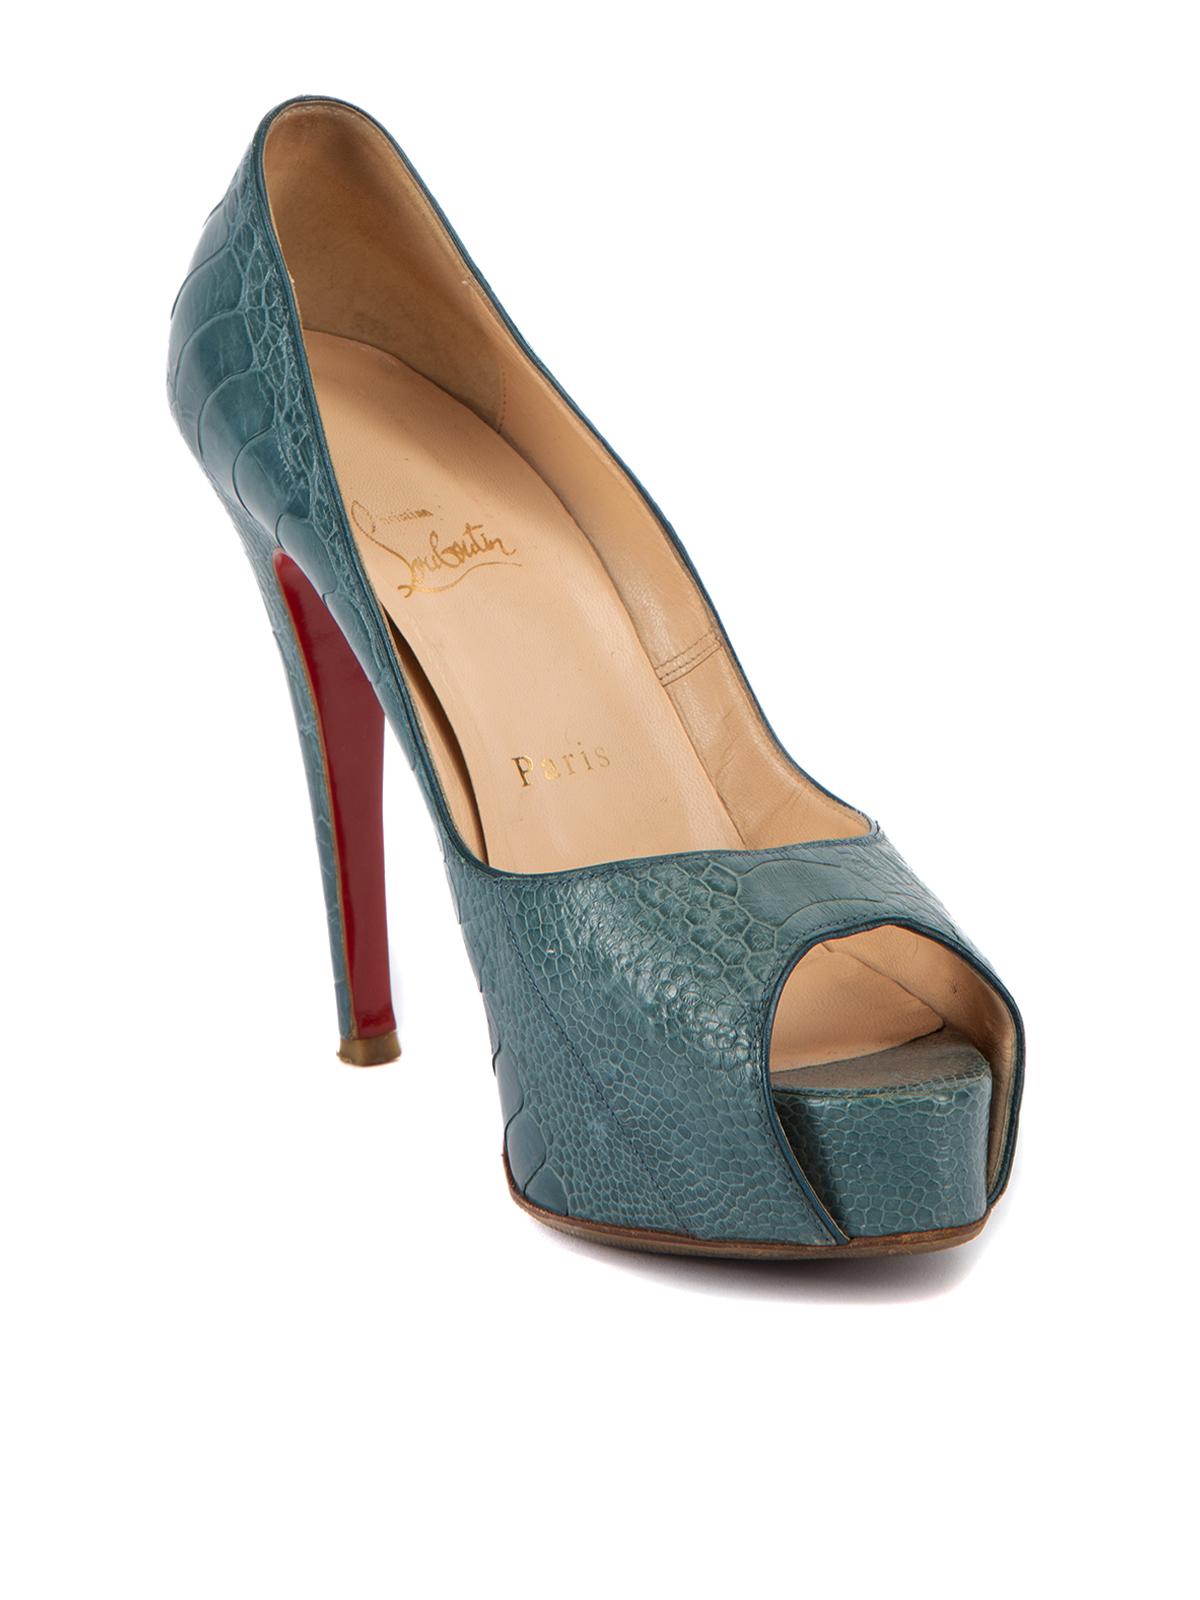 CONDITION is Very good. Minimal wear to heels is evident. Minimal wear to the insole and heel tips on this used Christian Louboutin designer resale item. Please not these shoes have been resold for extra protection. This item also comes with the